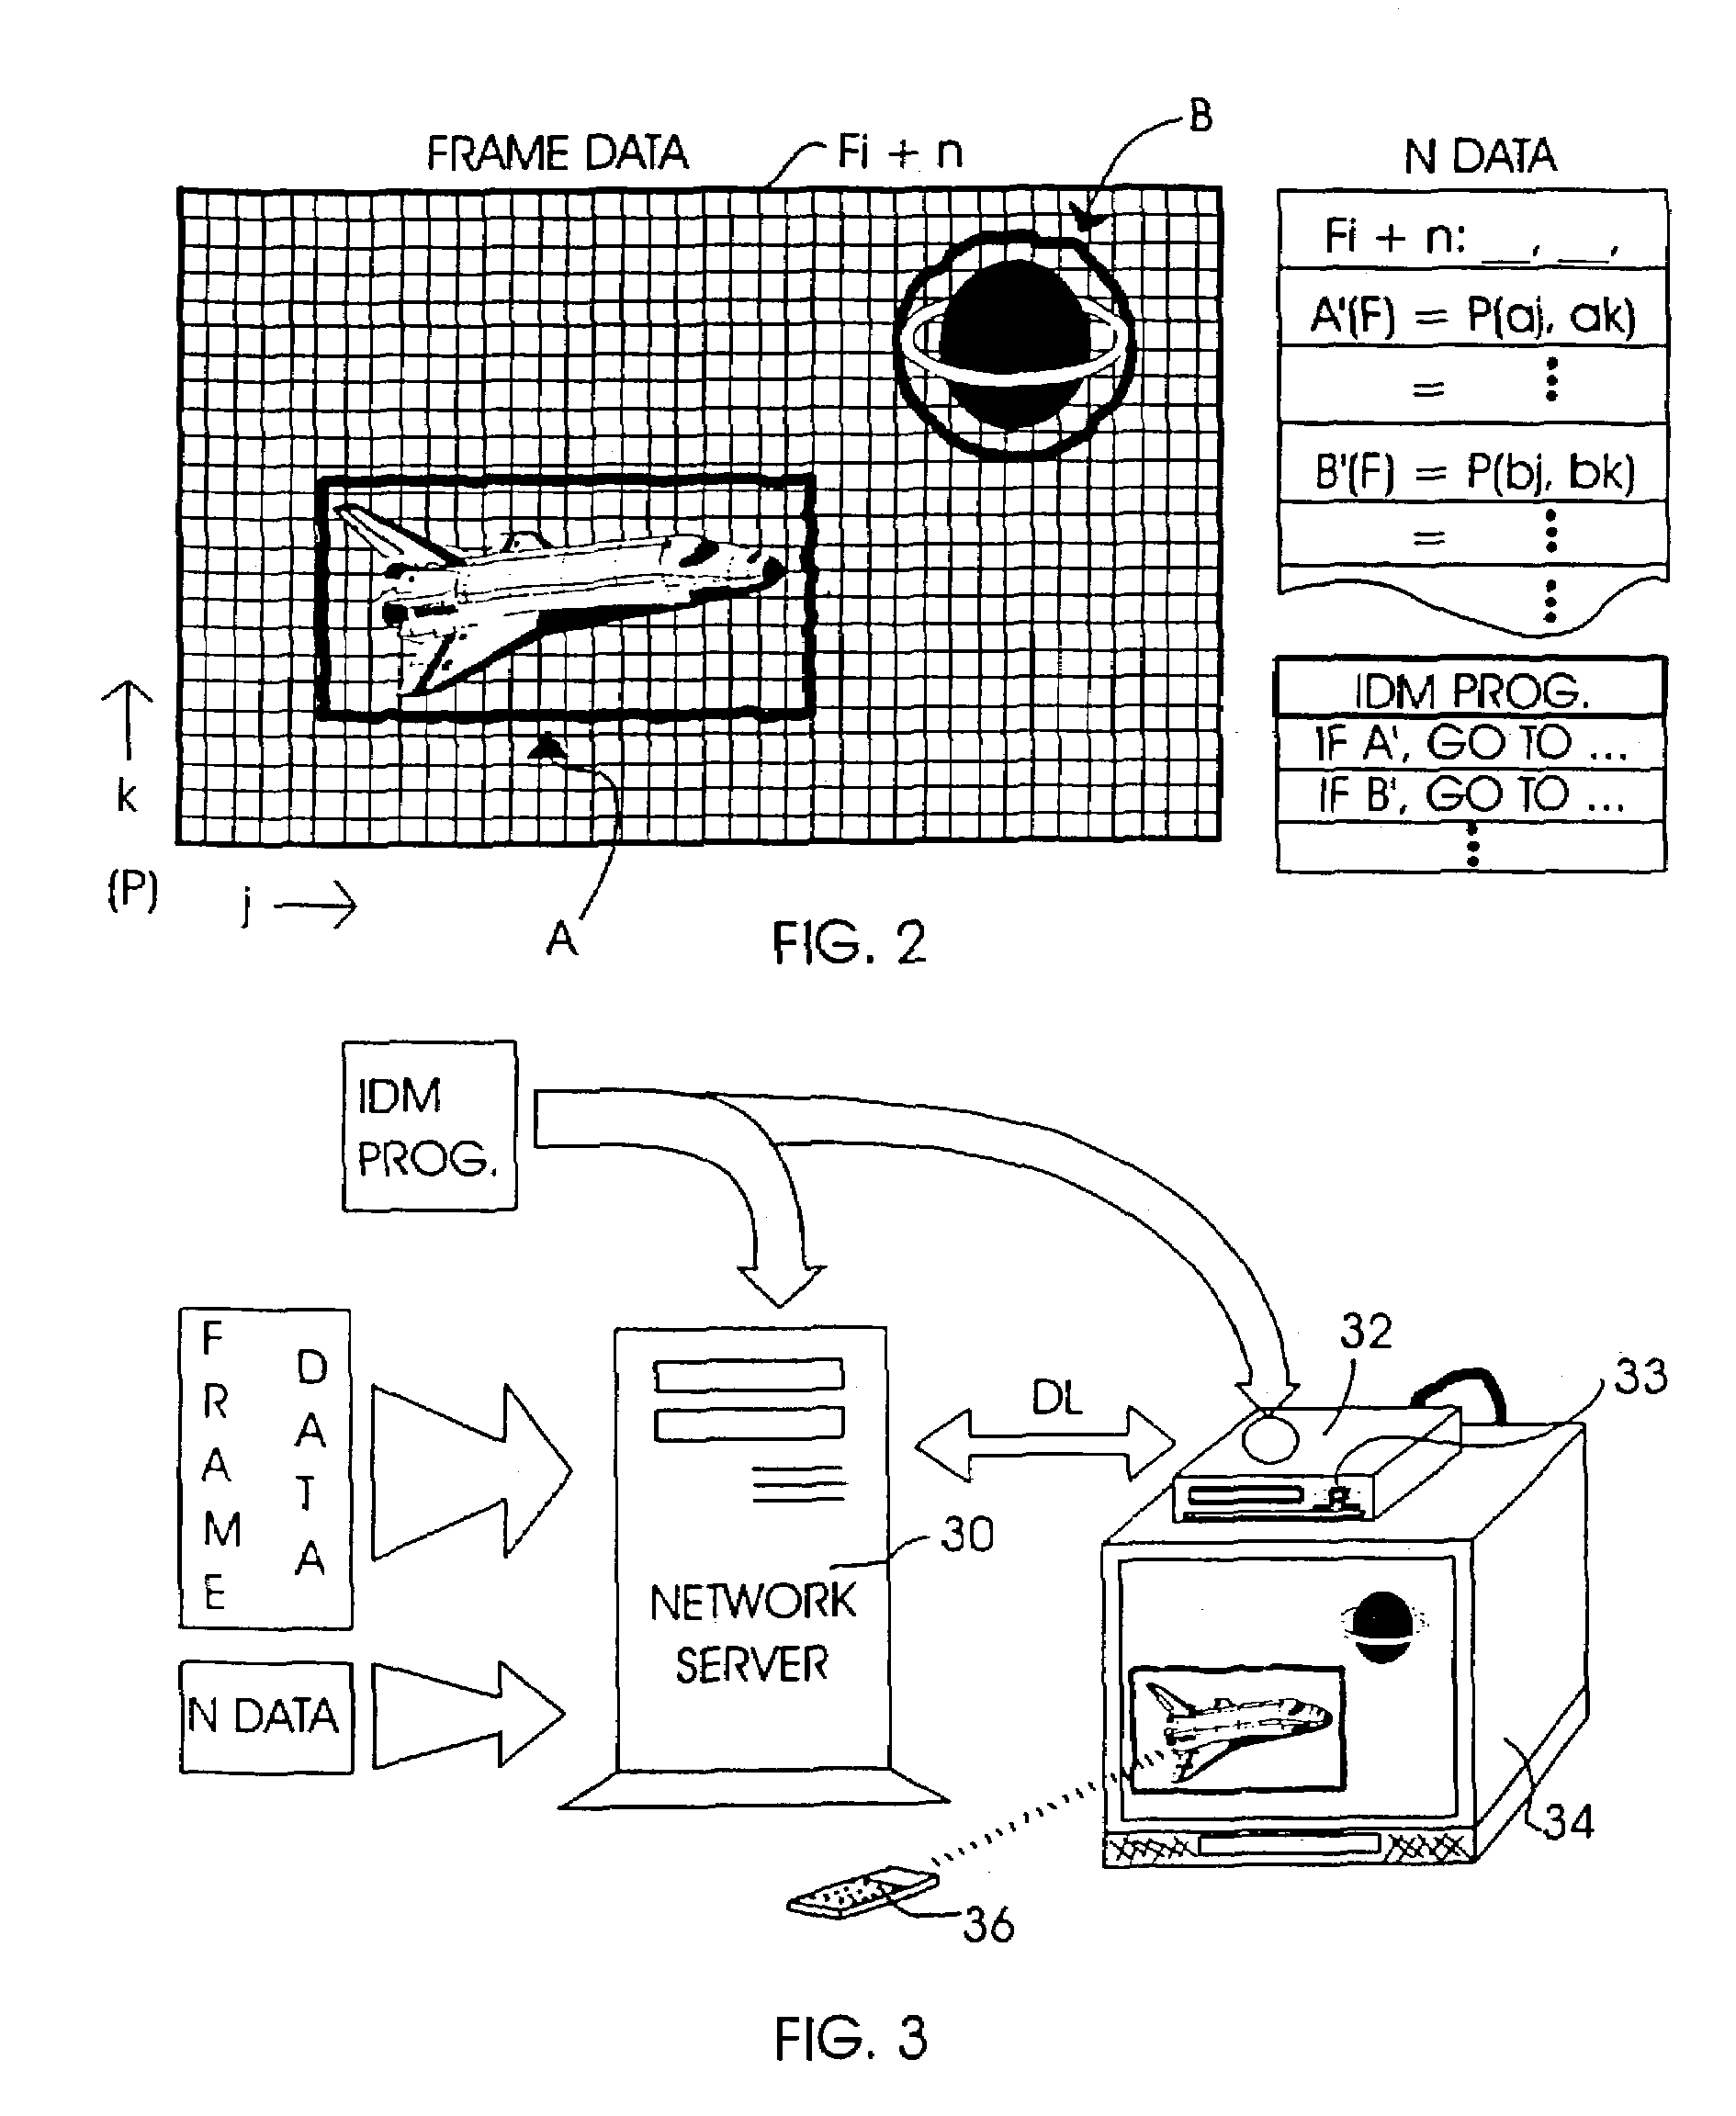 System for converting TV content to interactive TV game program operated with a standard remote control and TV set-top box